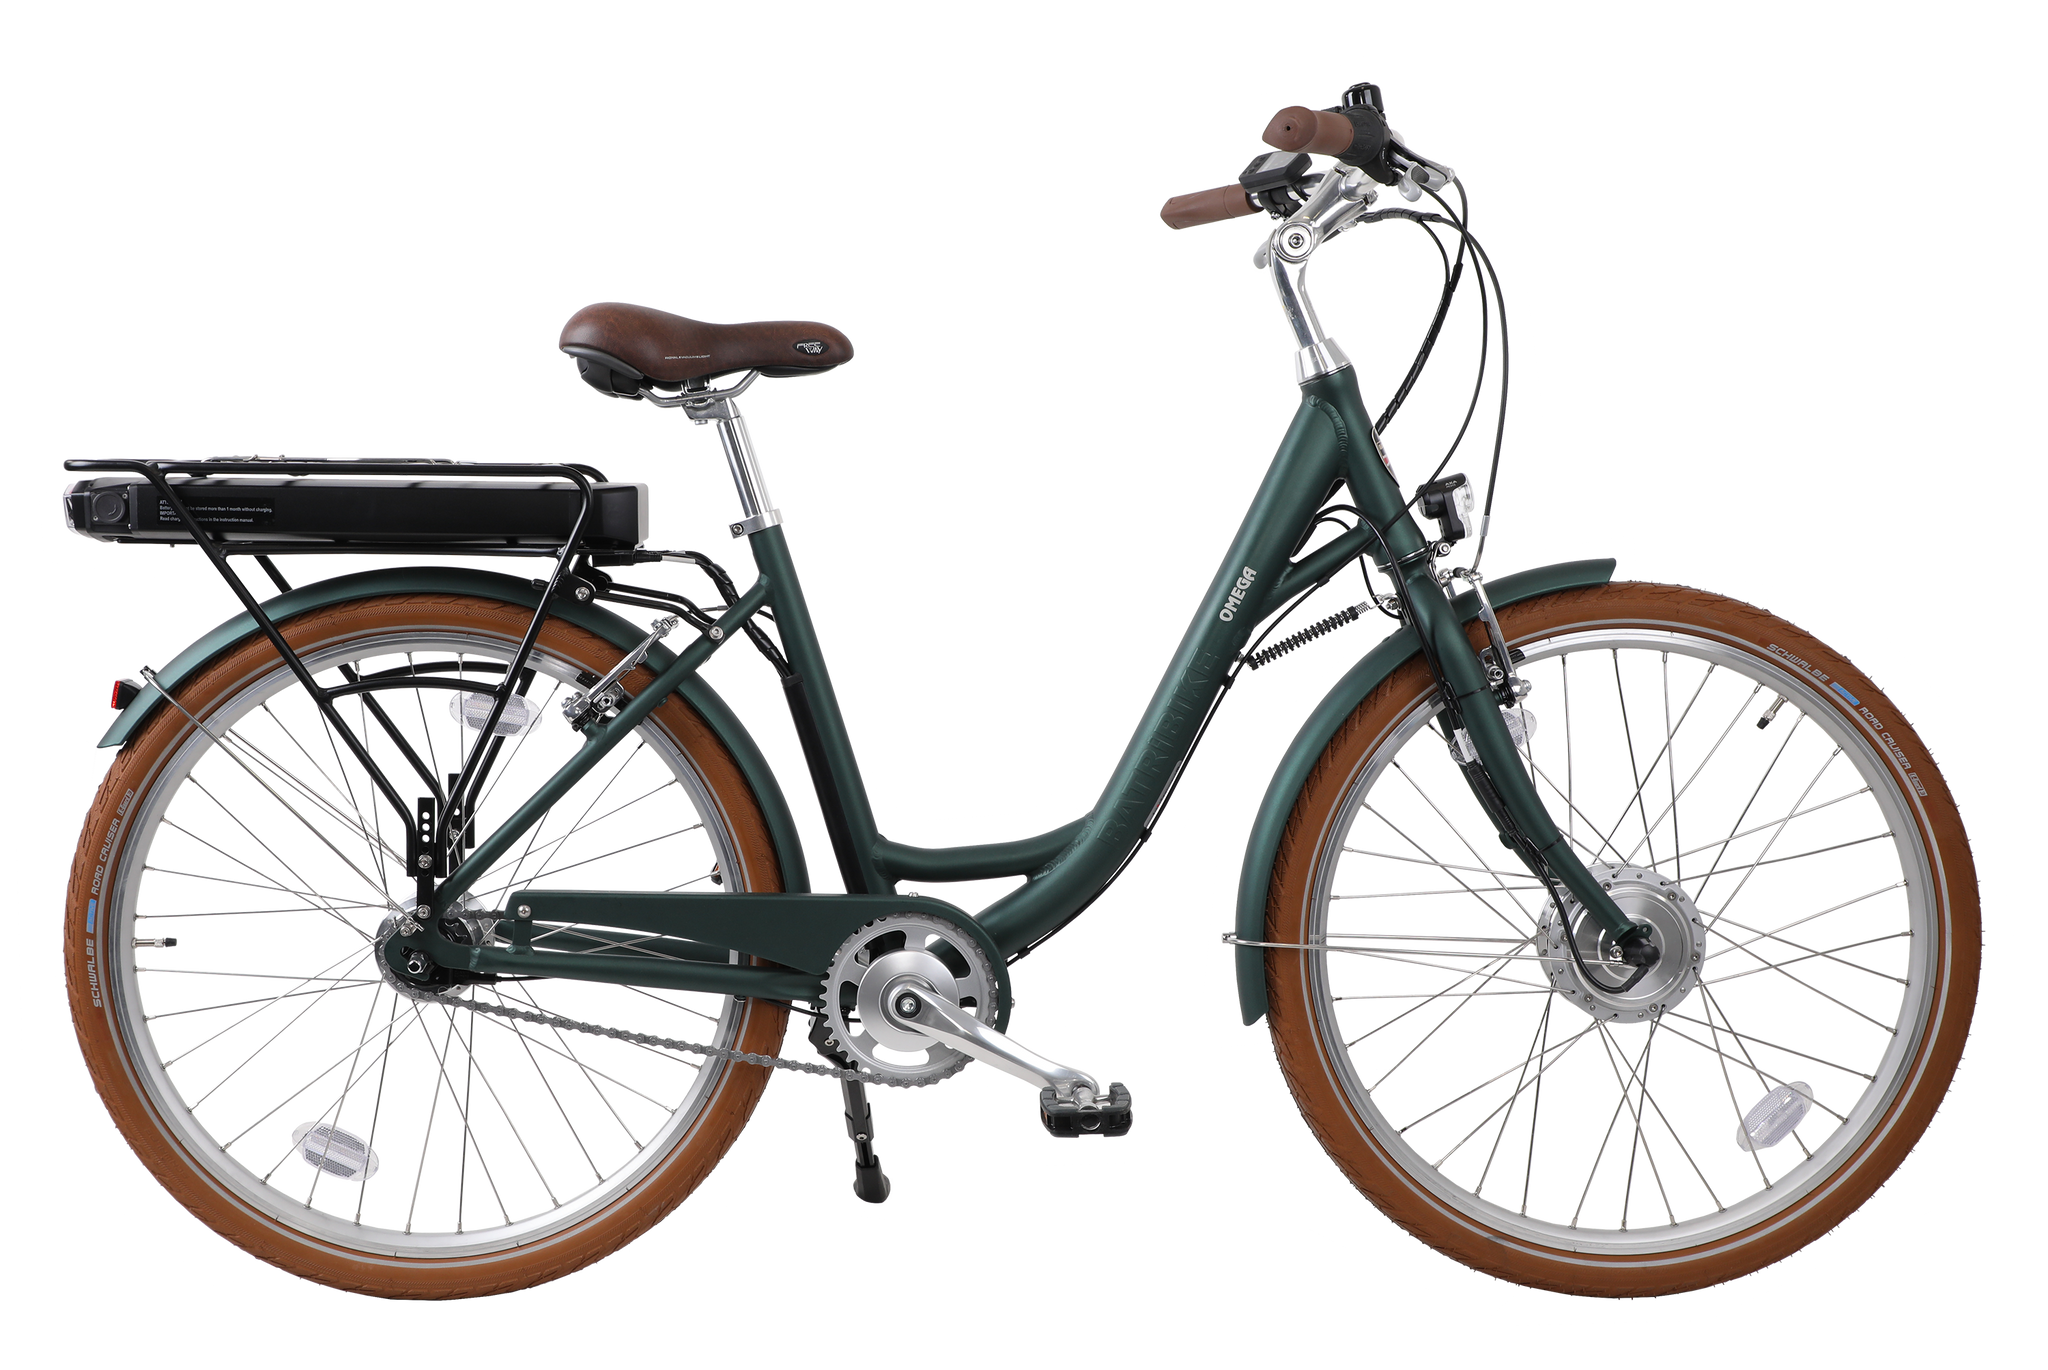 Omega step through, low seat eBike with 26 wheels